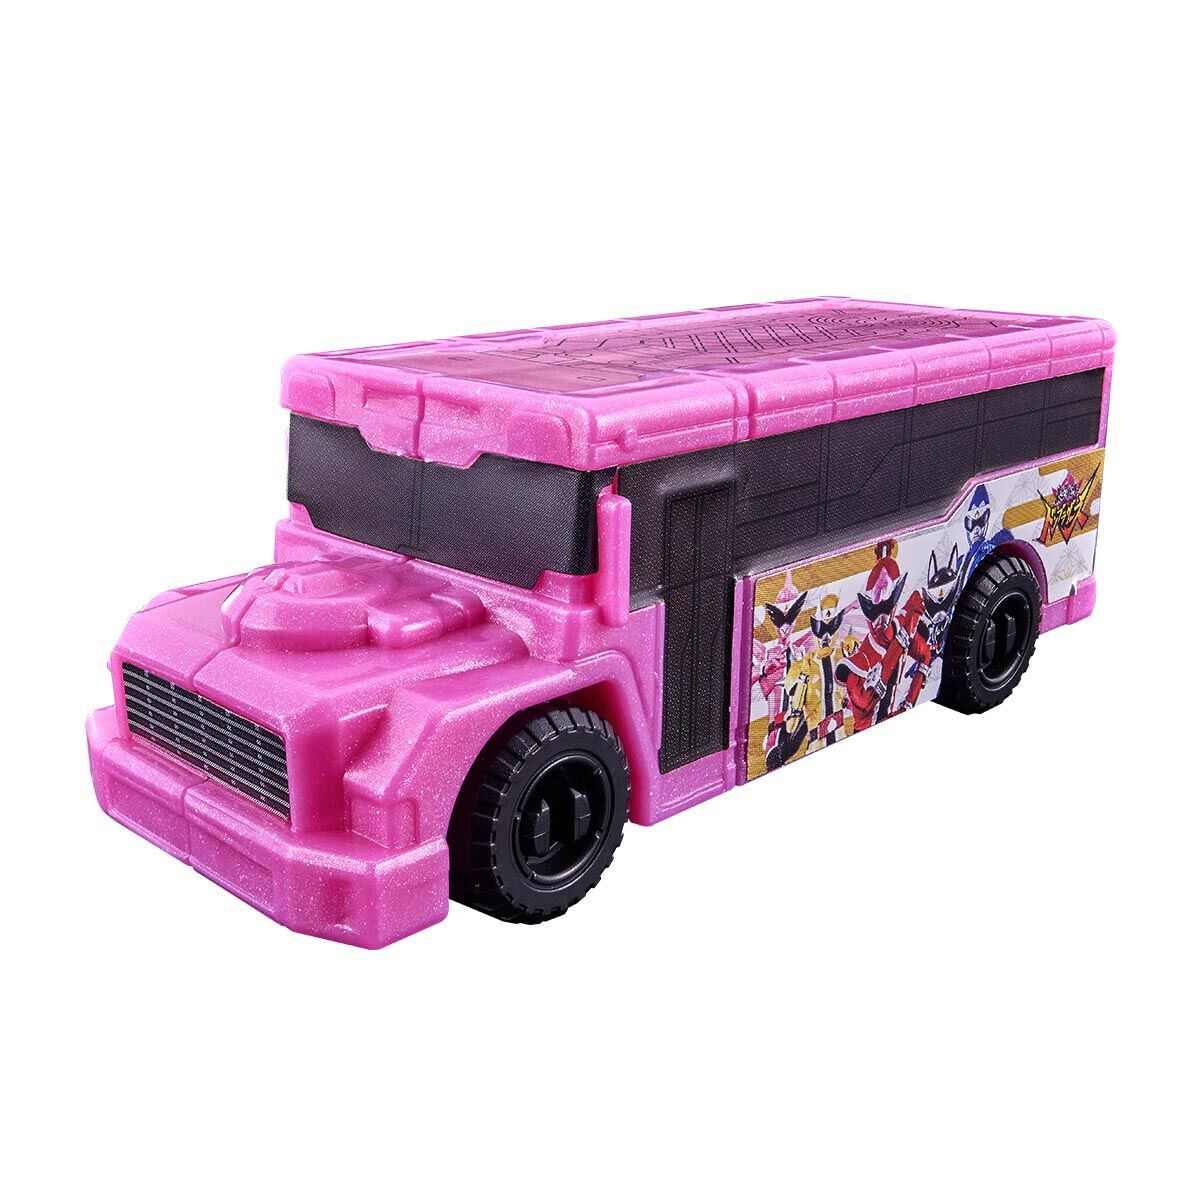 [PREORDER] BoonBoom Tire Plush & BoonBoom Legend Bus (DonBrothers Ver)